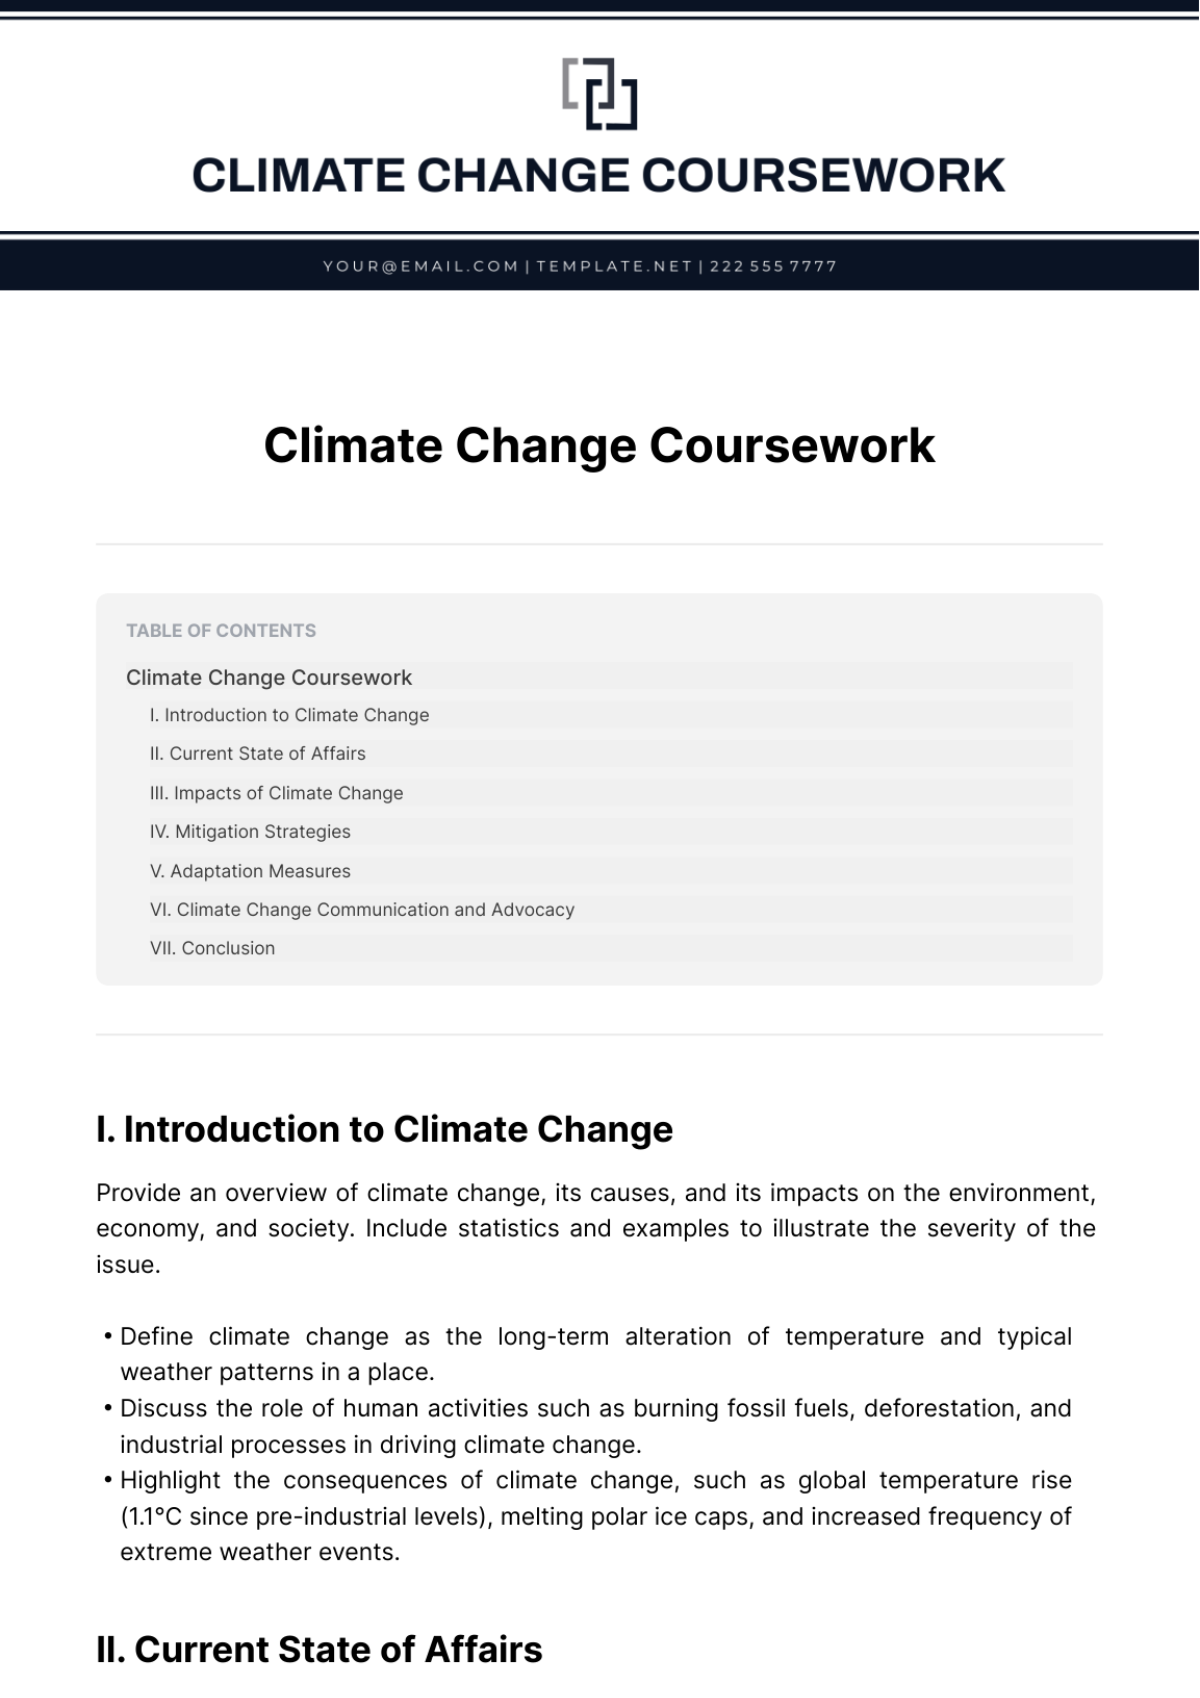 Climate Change Coursework Template